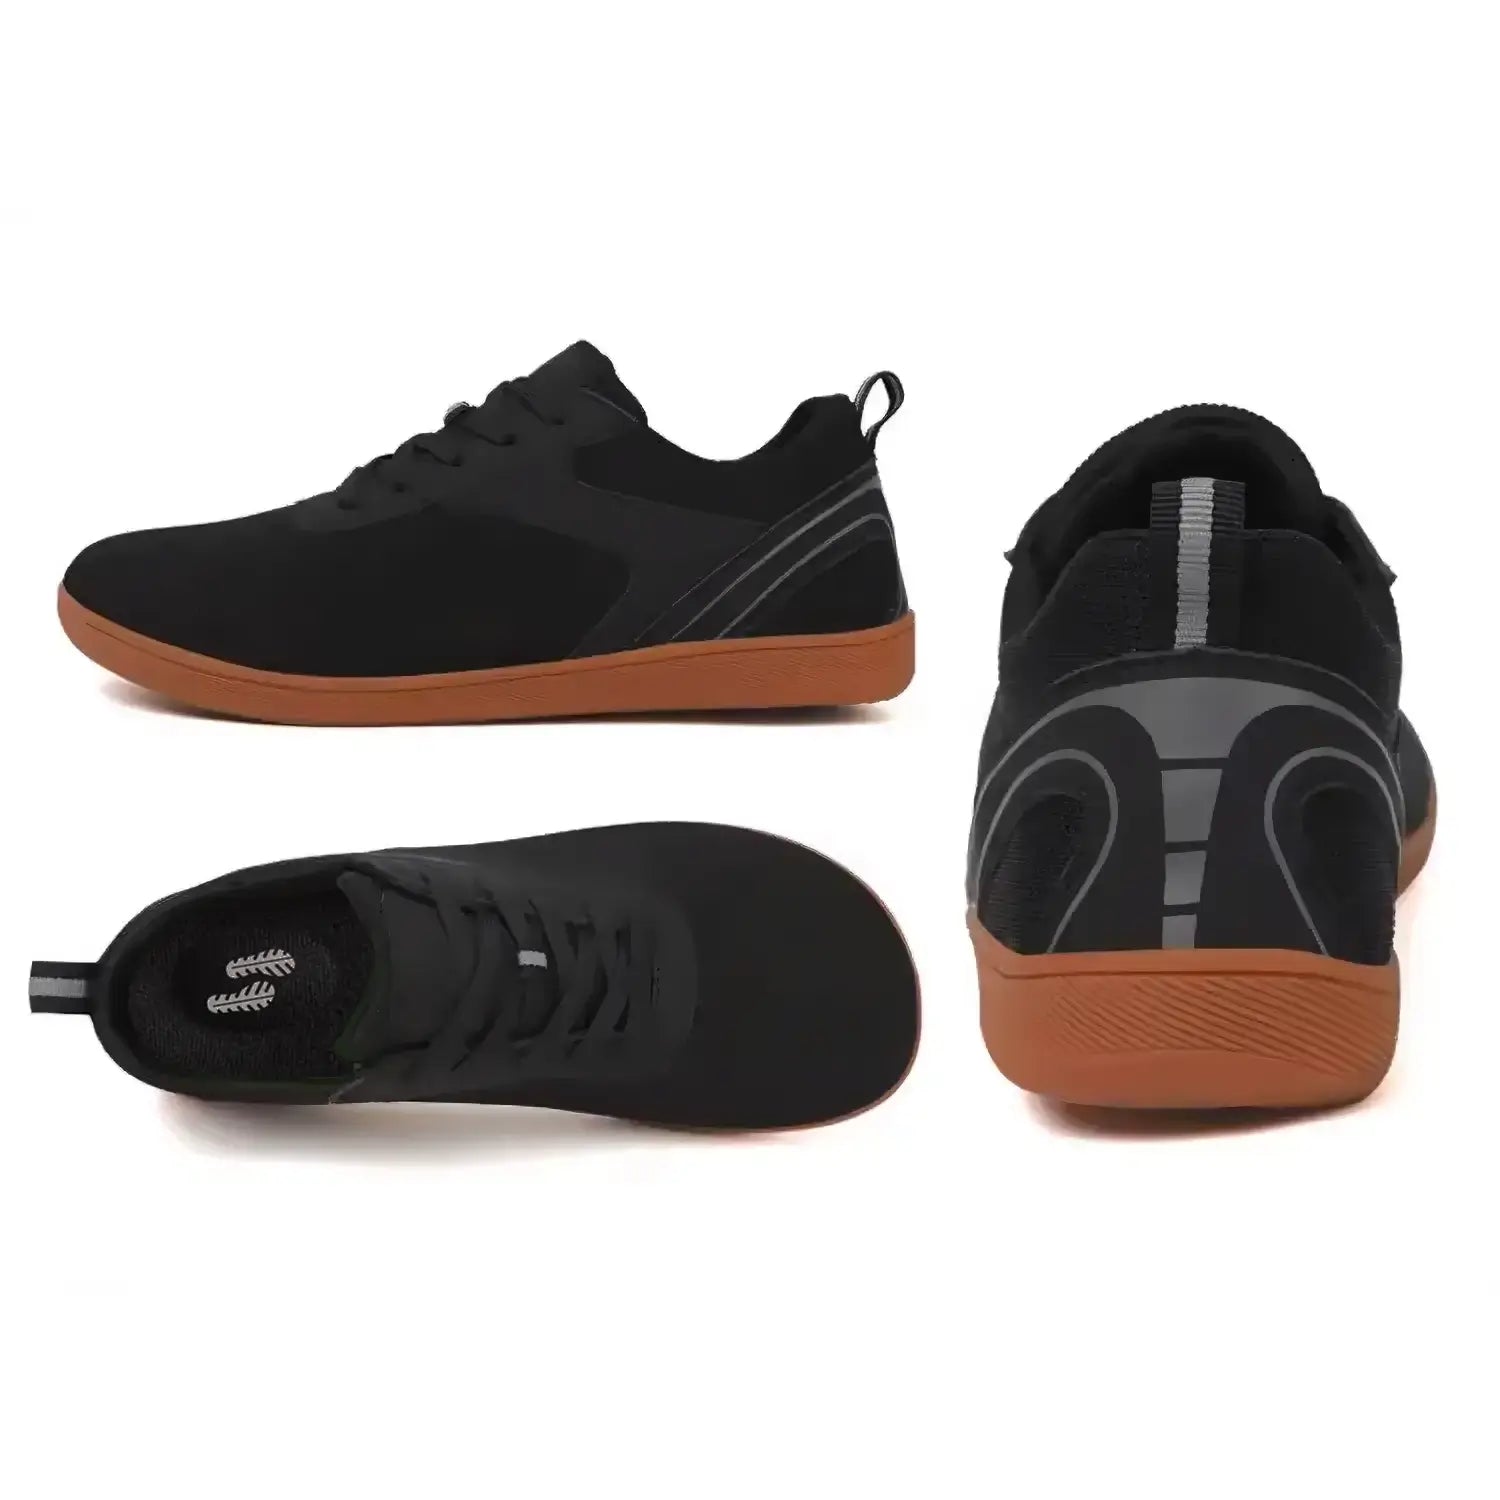 Native - Sneaker Barefoot Shoes (Unisex) (1+1 FREE)